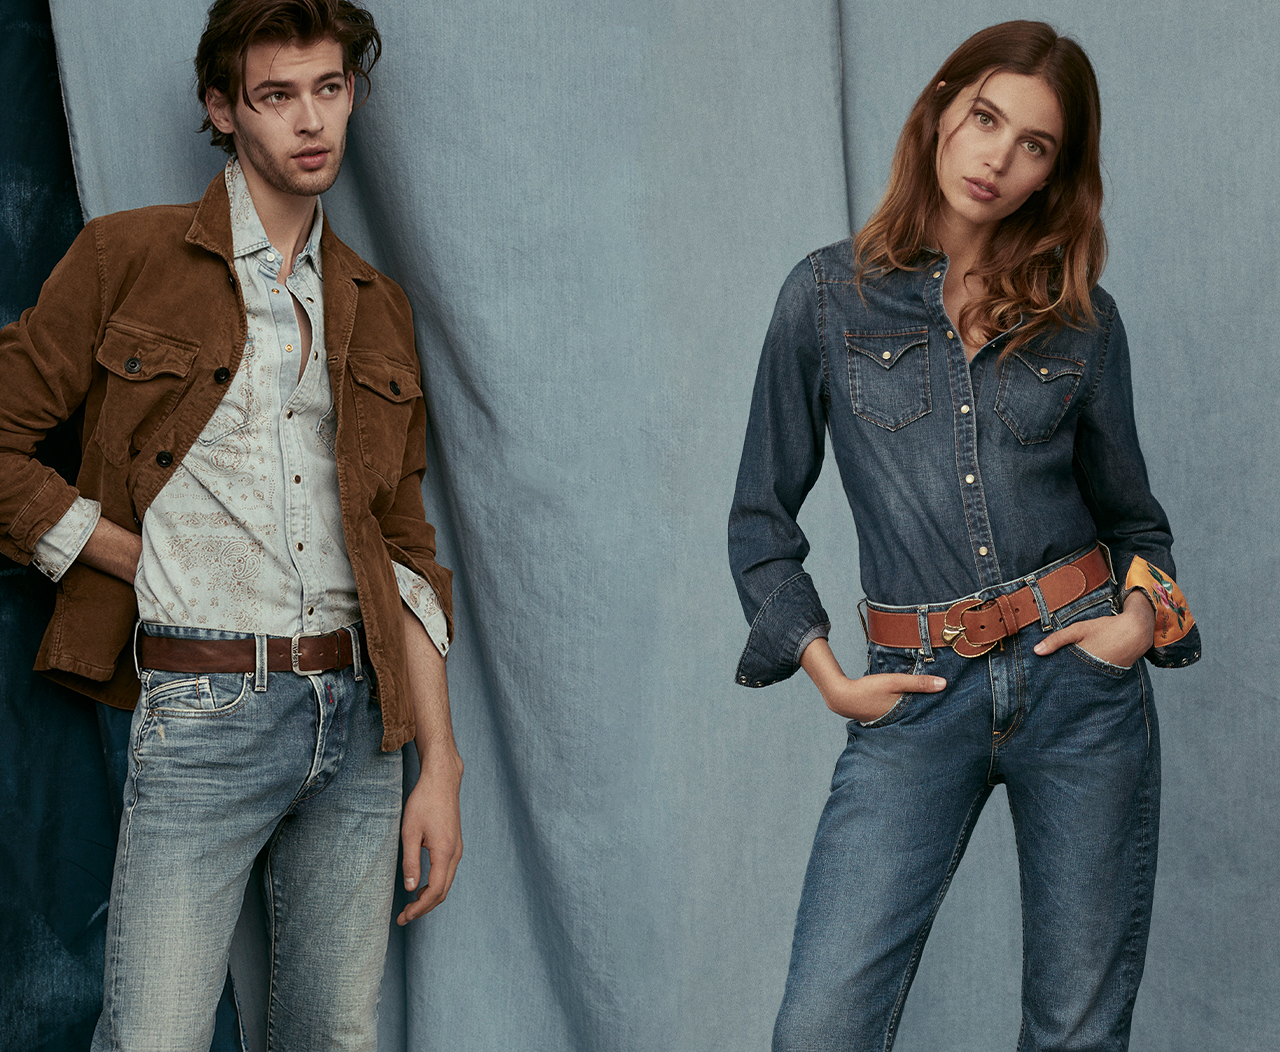 DISCOVER A NEW DENIM STYLE